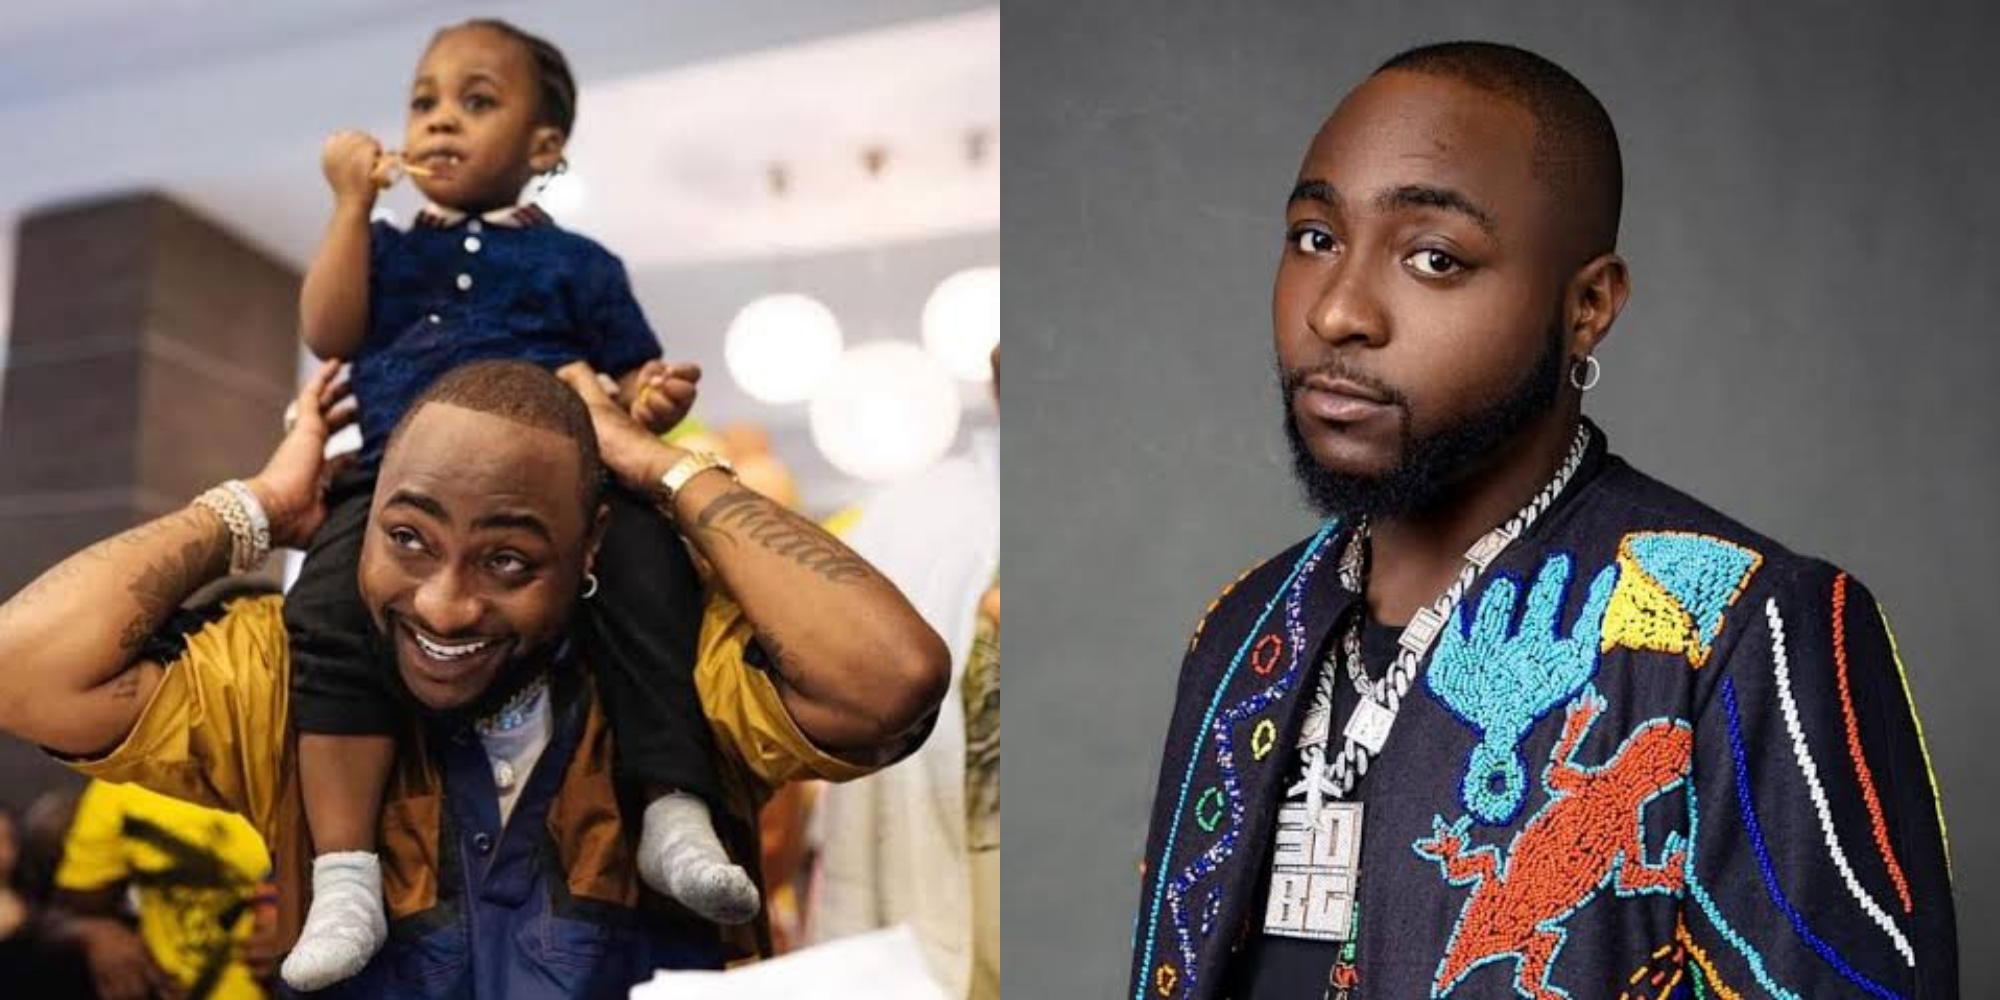 Davido finds healing in success of "Timeless" album after son's tragic passing